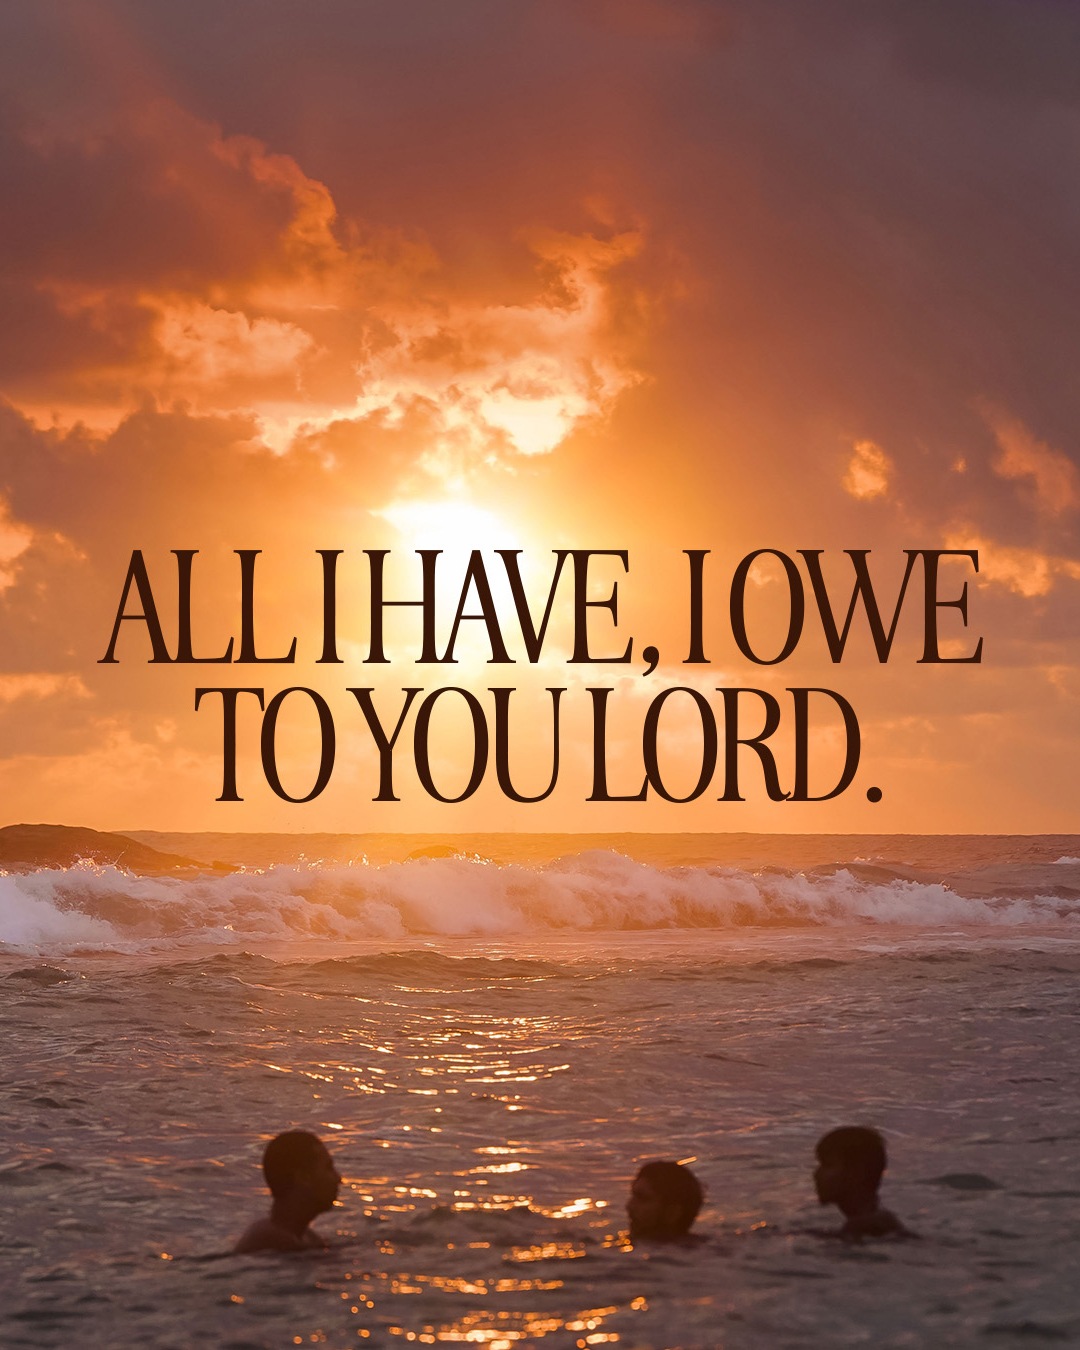 All I have, I owe to you Lord.